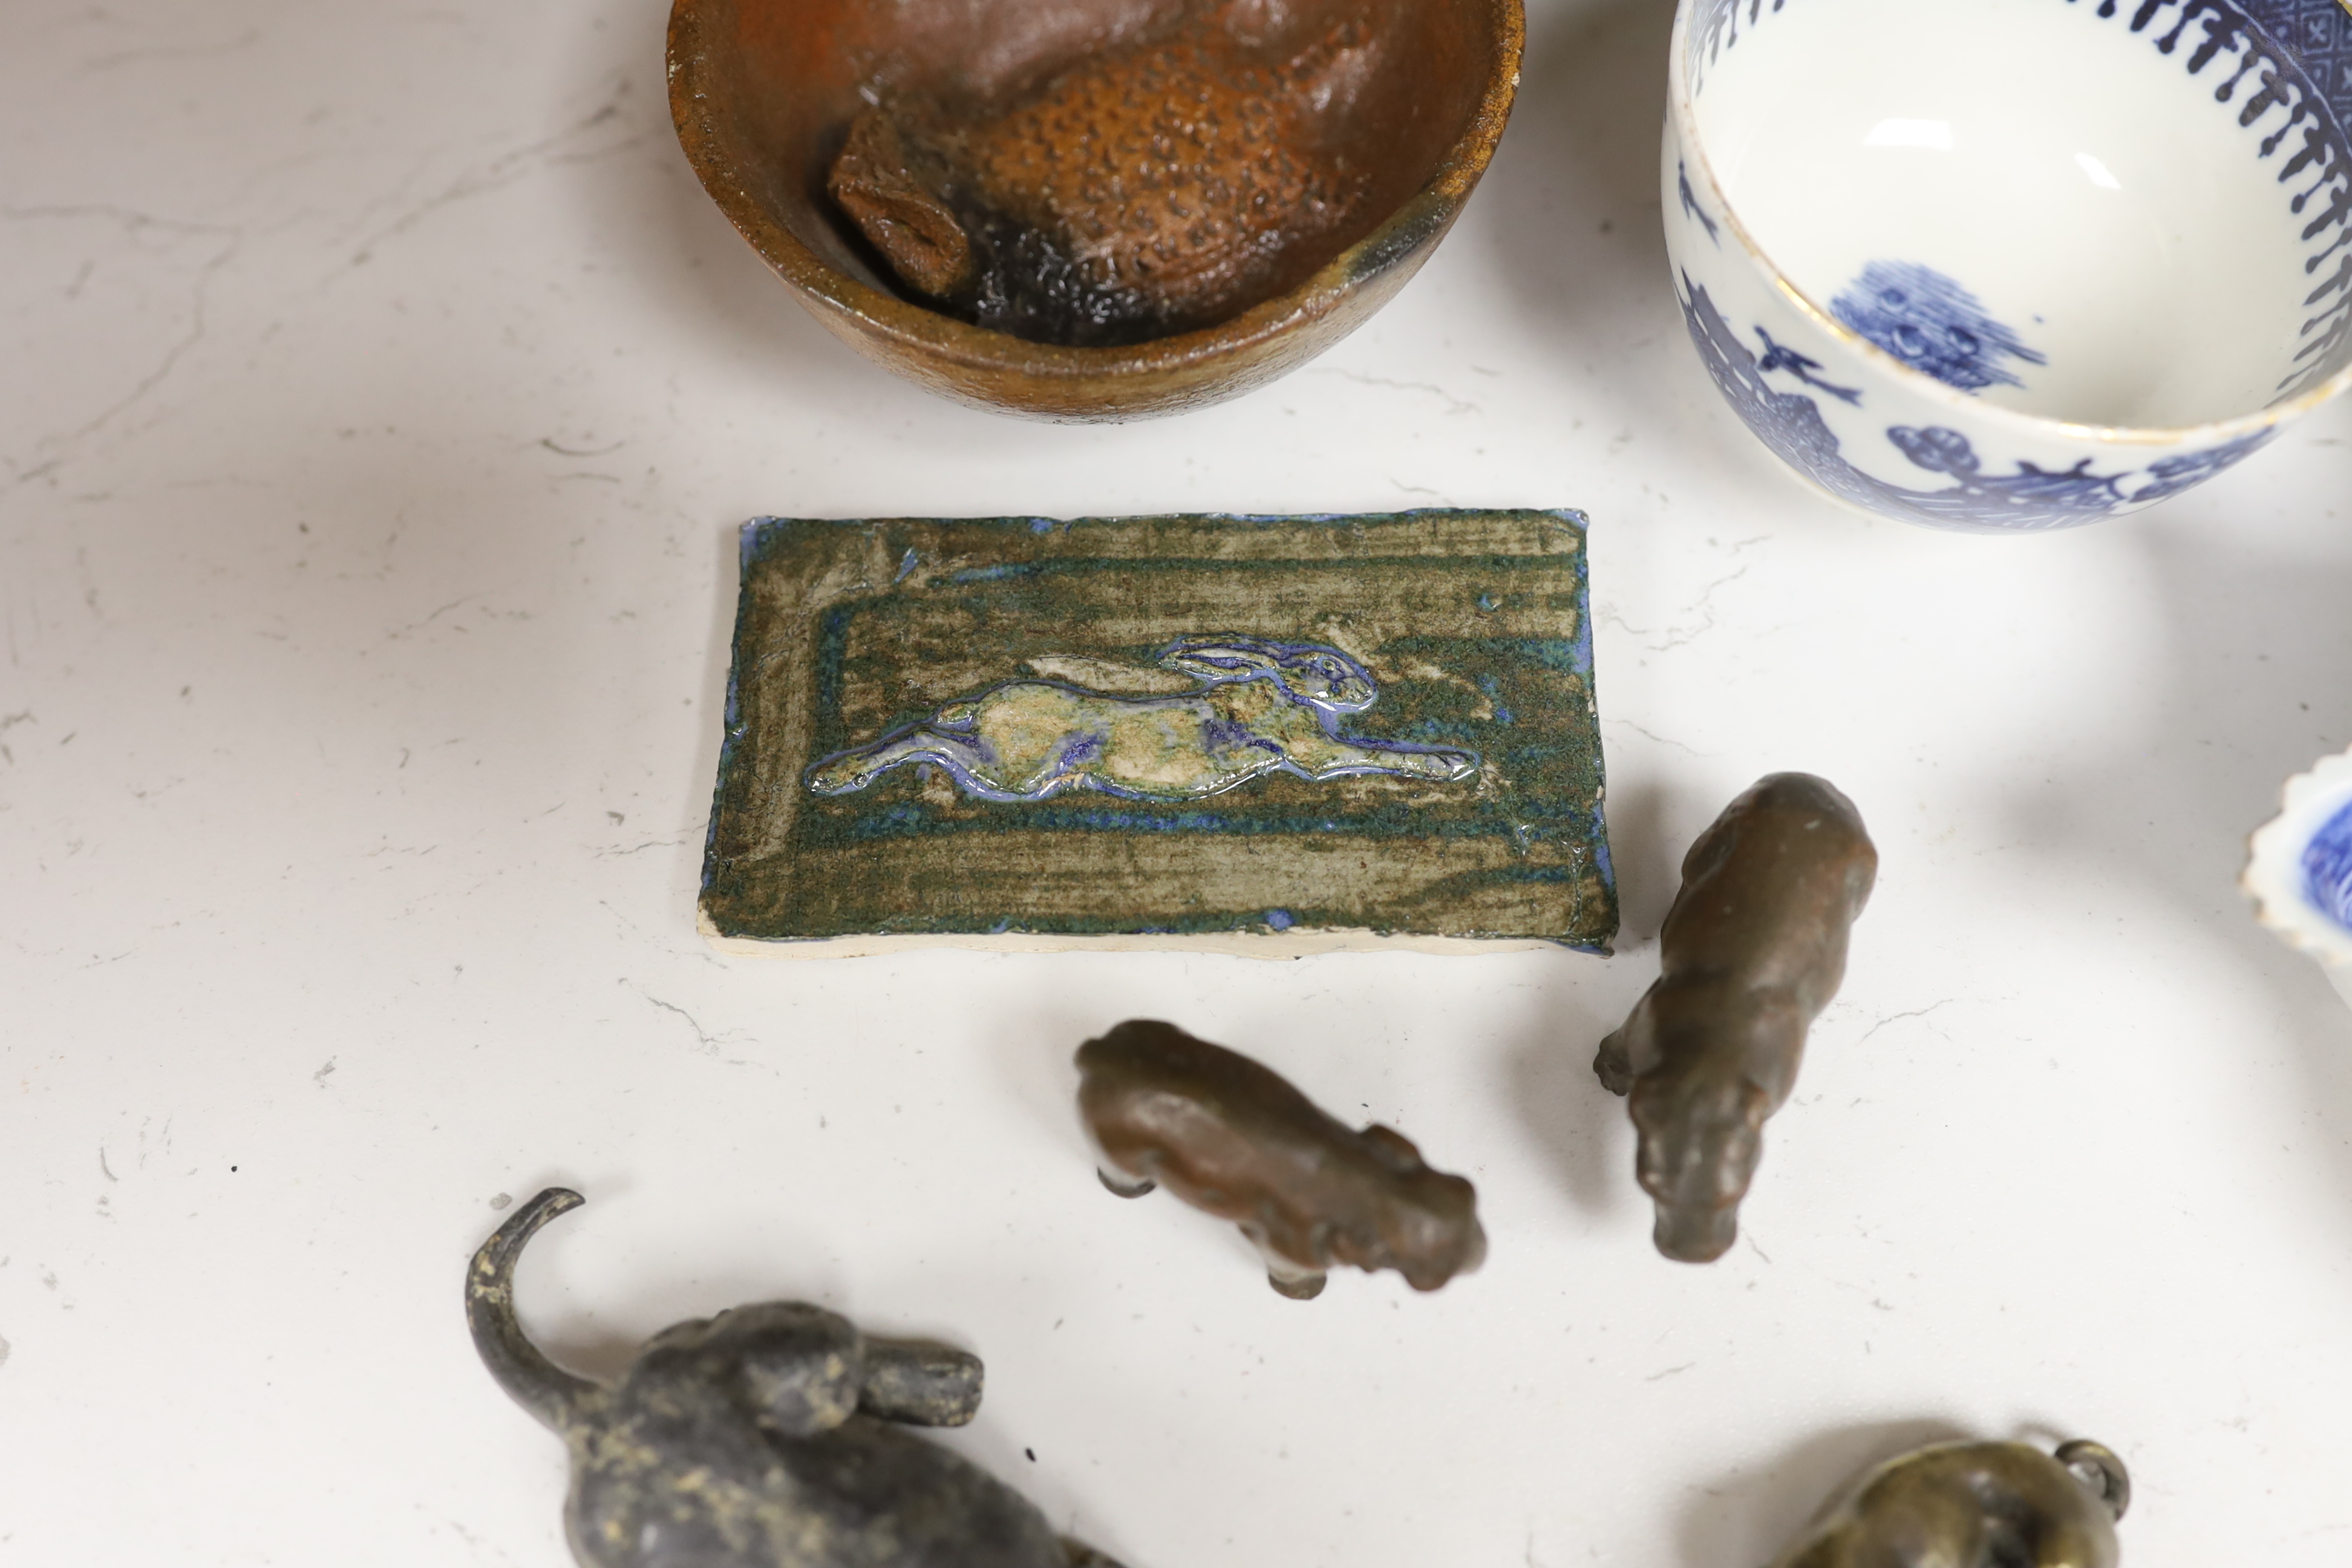 An early 20th century Viennese cold painted bronze figure of an African grey parrot, two 18th century English coffee cups, a leaf shape pickle dish, Victorian pot lid, other metal animal figures, a Japanese small carved